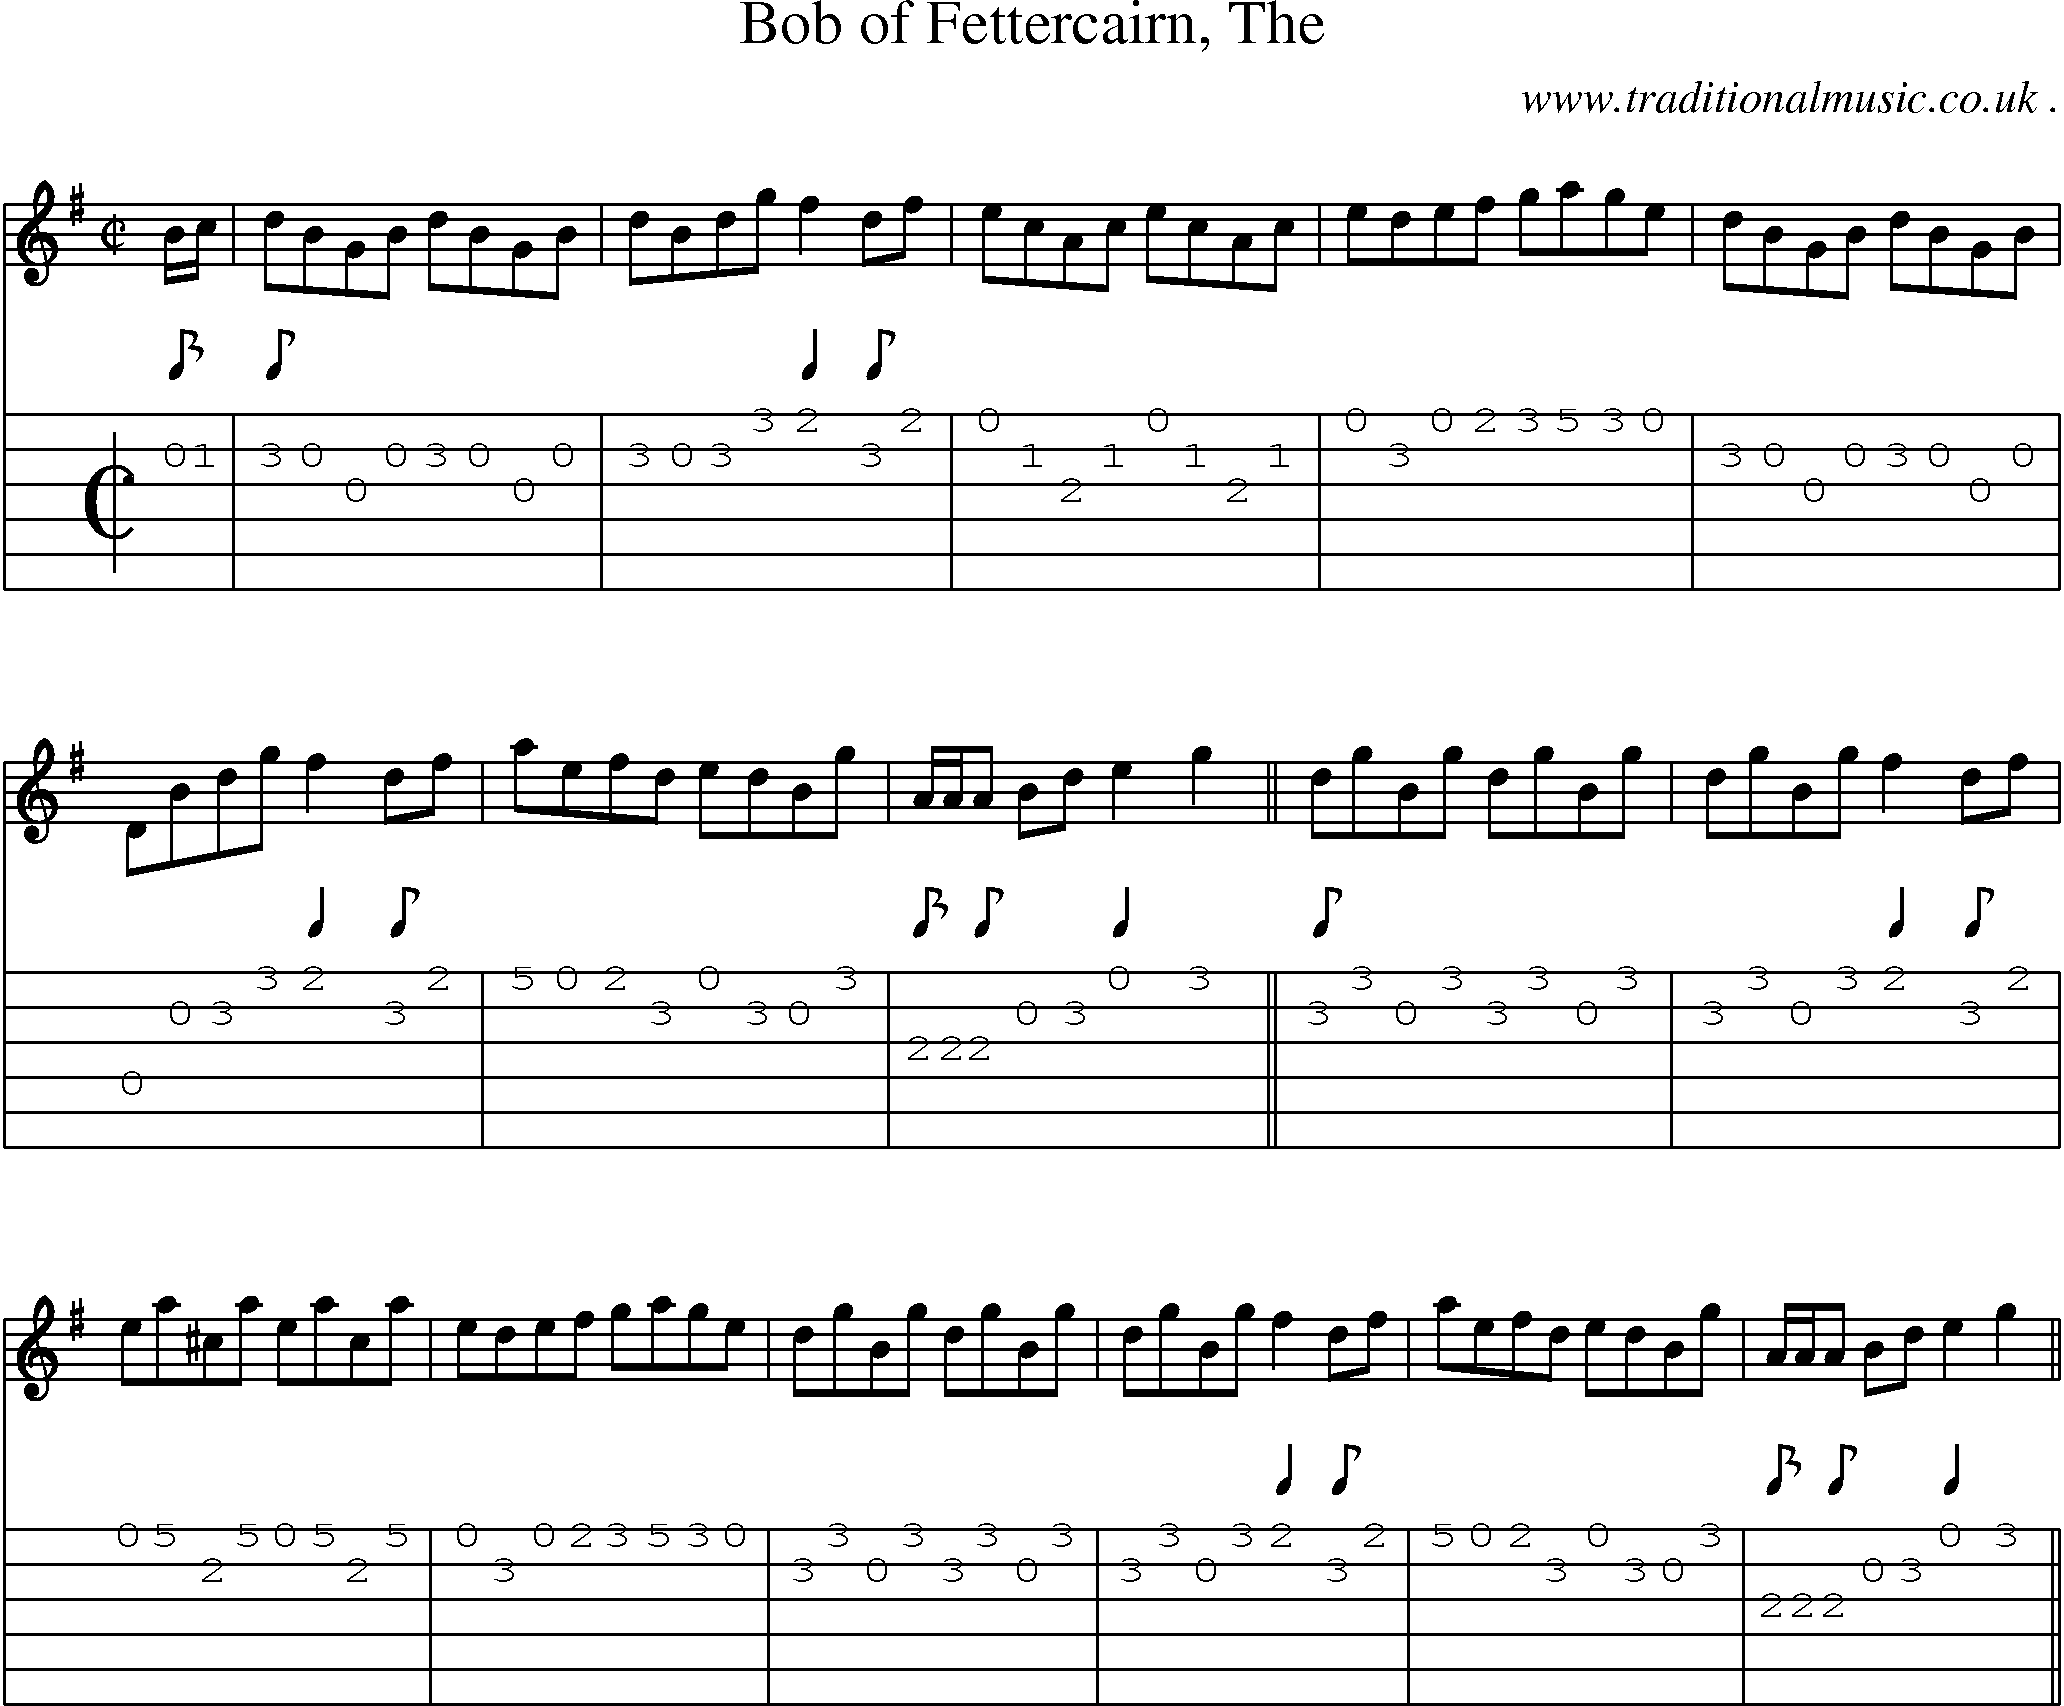 Sheet-music  score, Chords and Guitar Tabs for Bob Of Fettercairn The